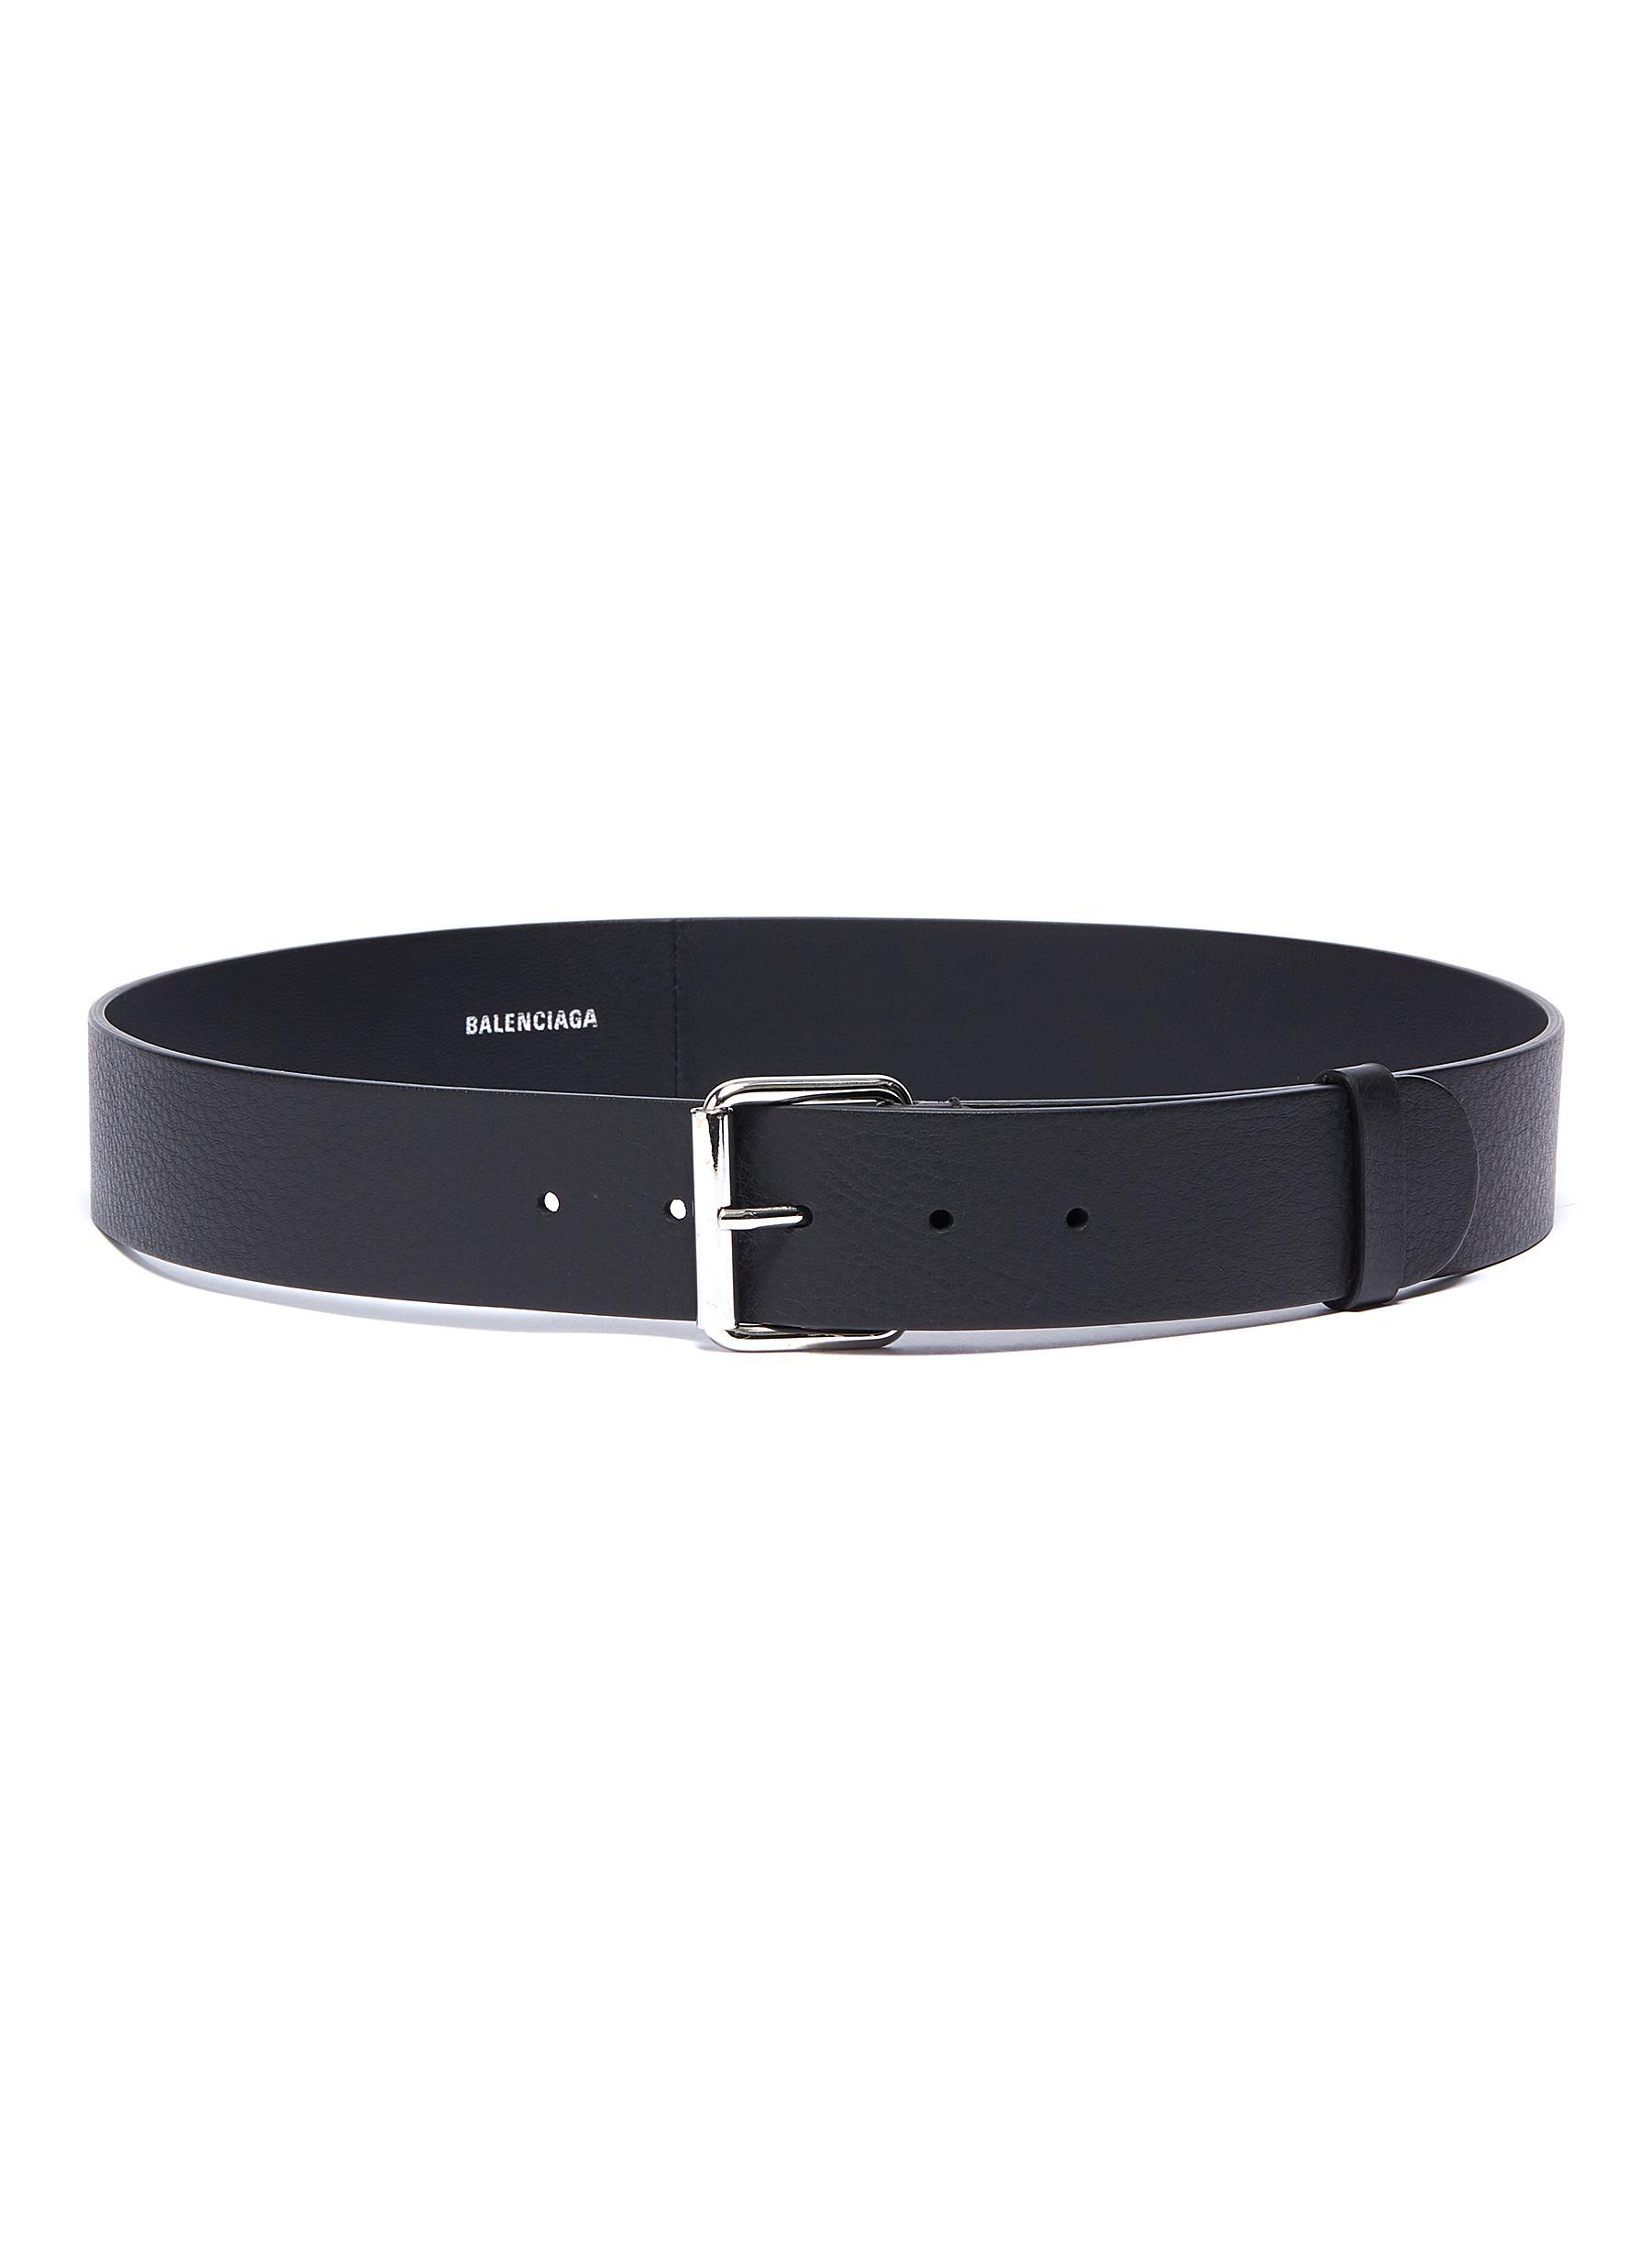 Balenciaga 'everyday' Buckled Leather Belt in Black for Men - Lyst